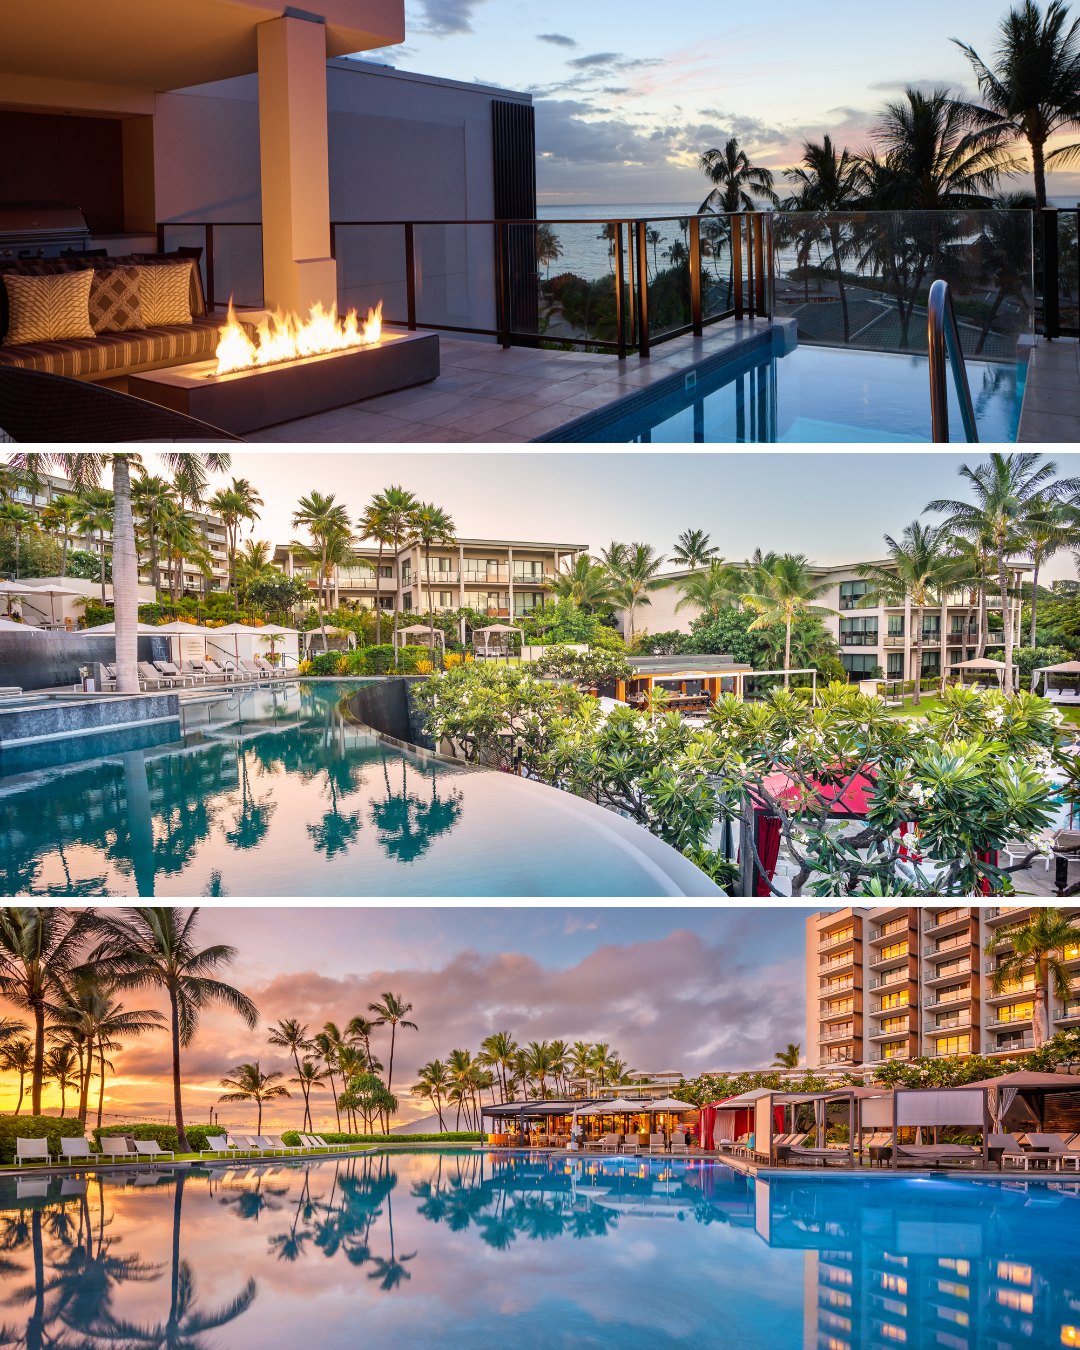 wide angle shots of the Andaz Maui pools including a private plunge pool